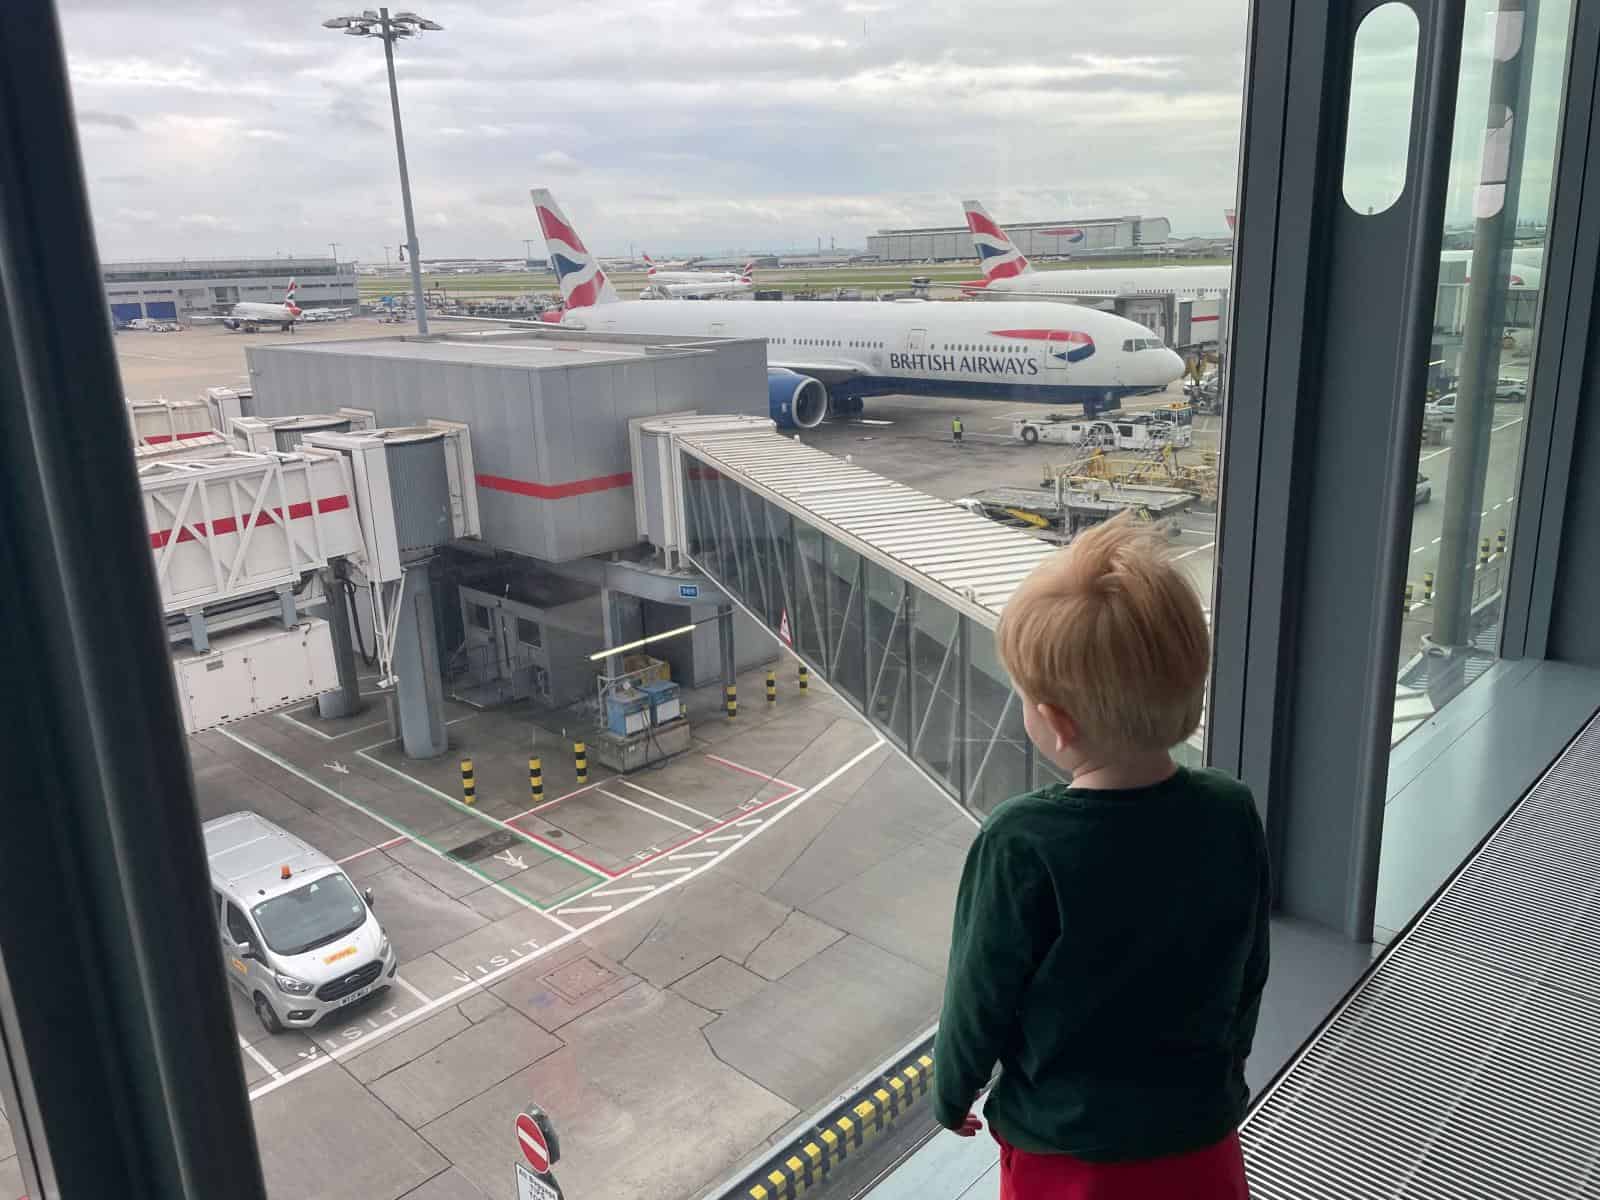 Toddler stood with his back to camera looking through airport window at plane